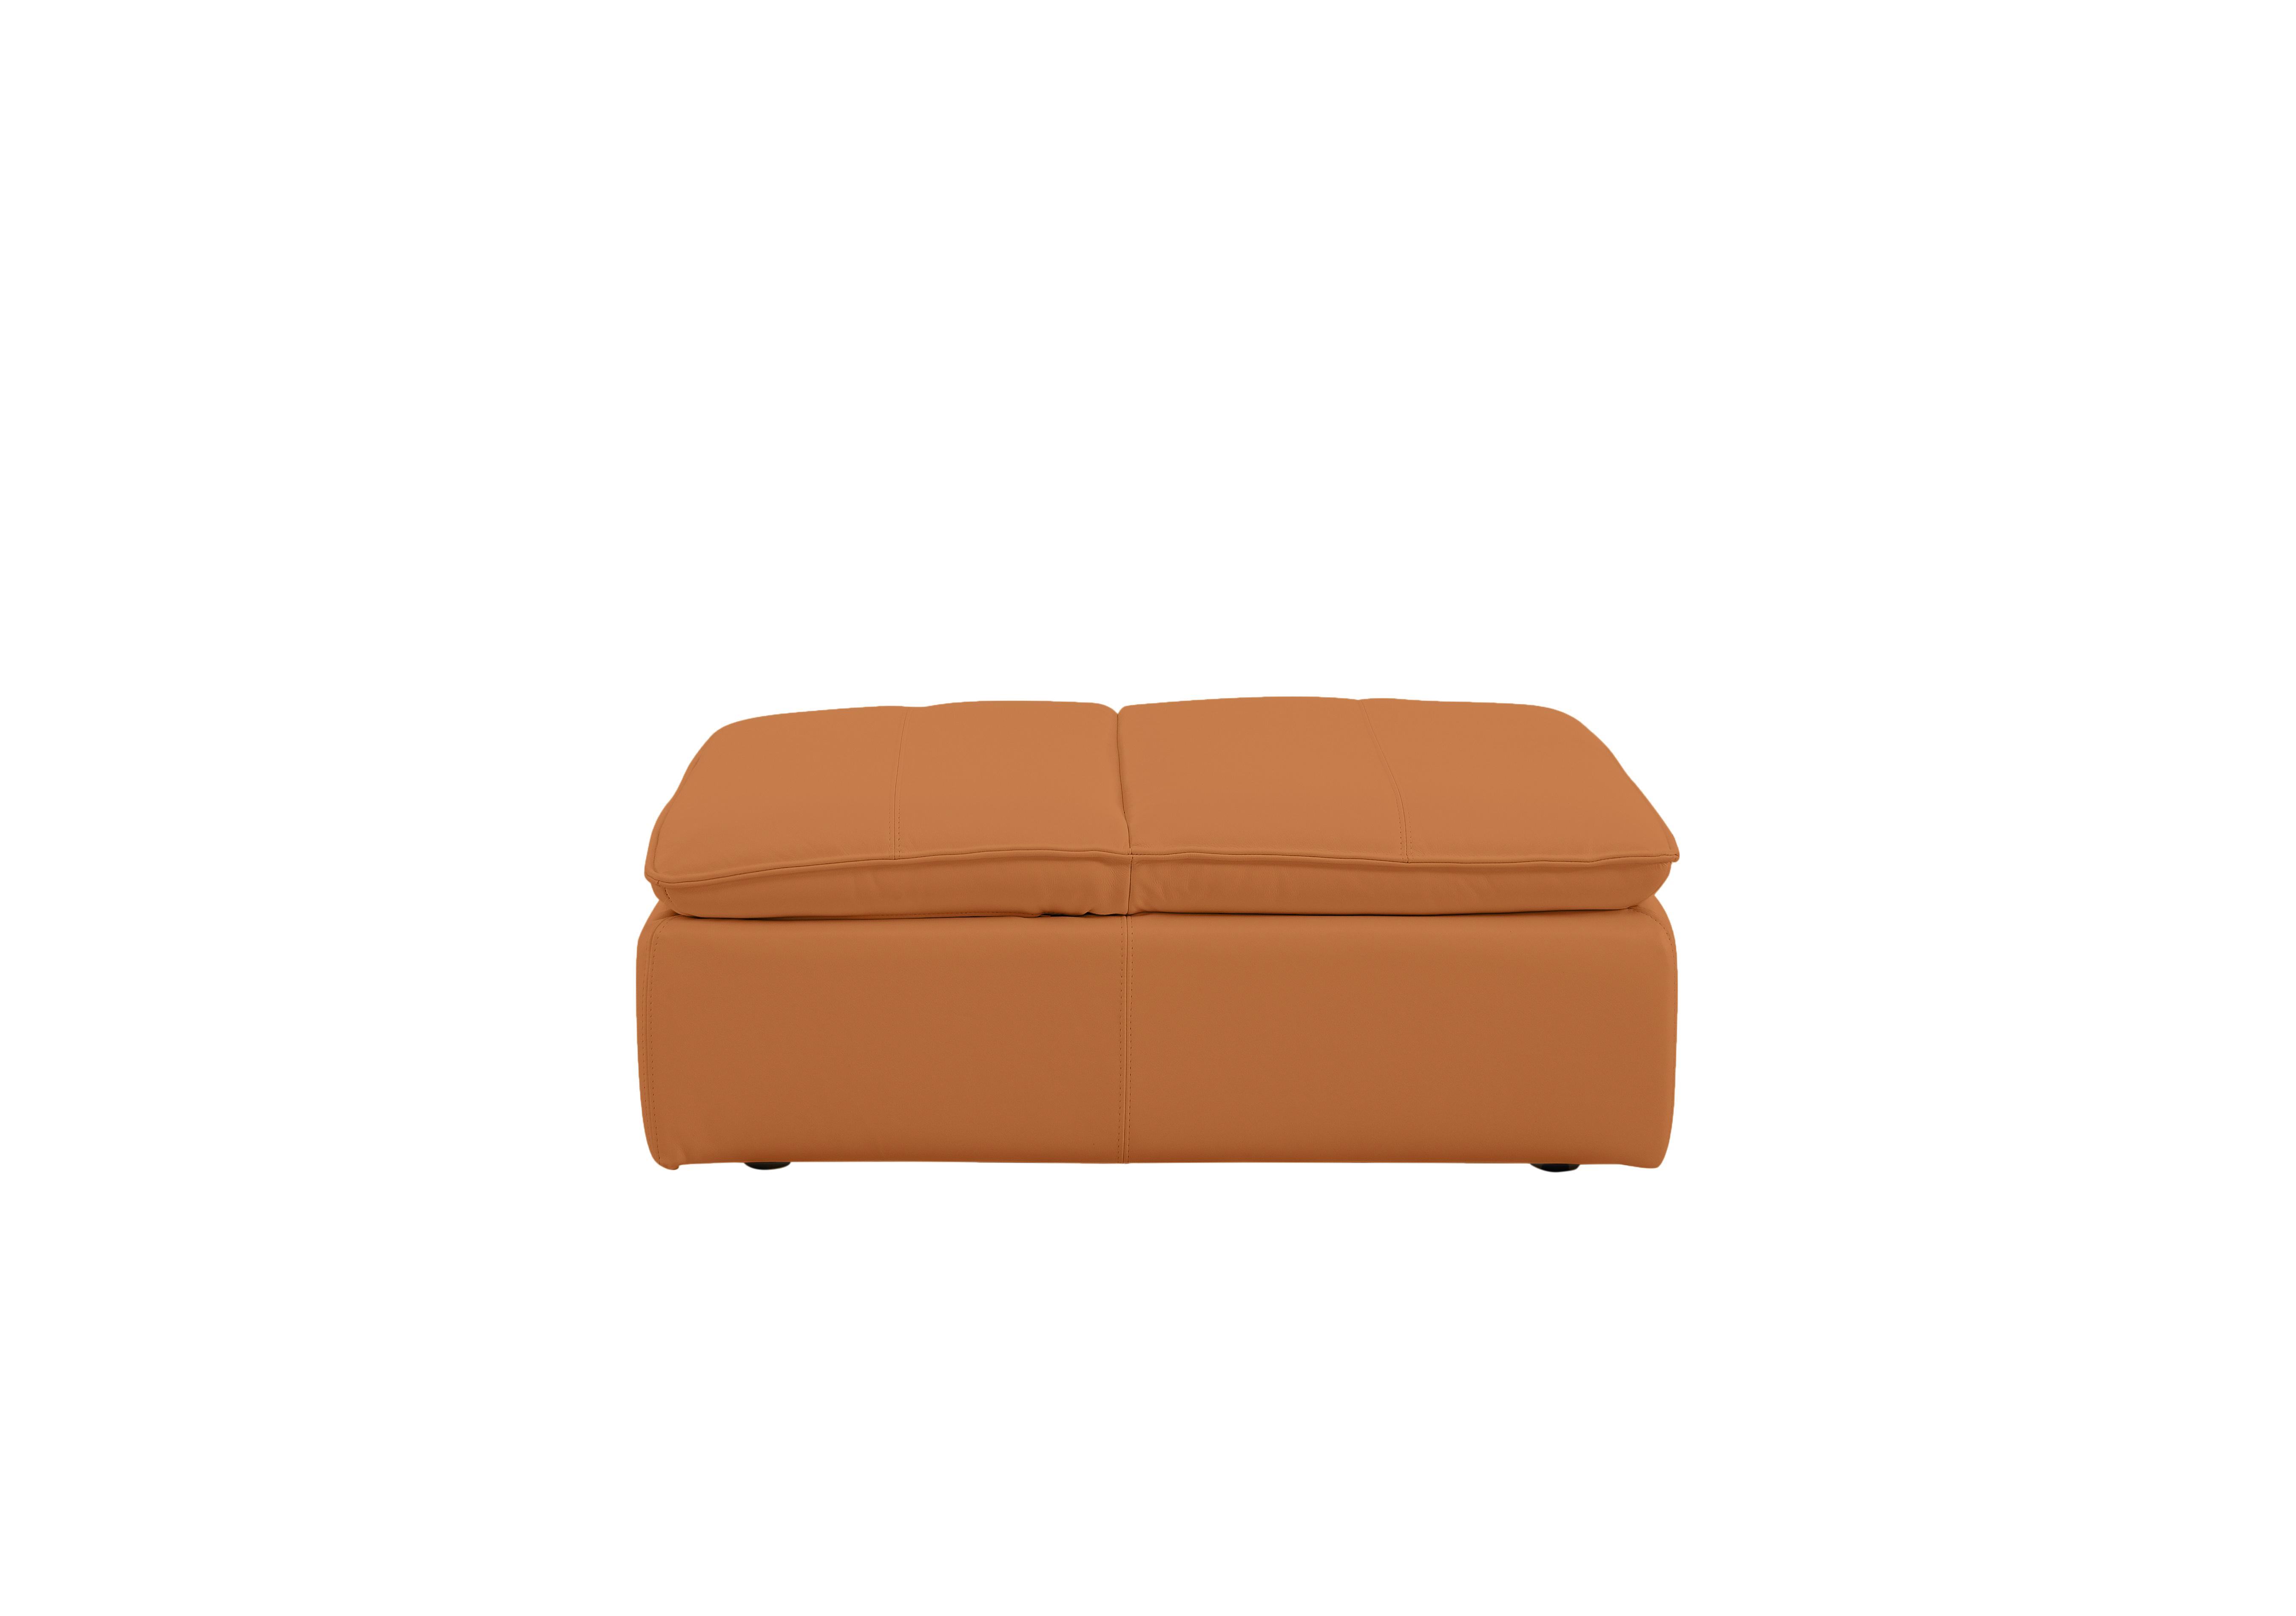 Starlight Express Leather Chair Footstool in Bv-335e Honey Yellow on Furniture Village